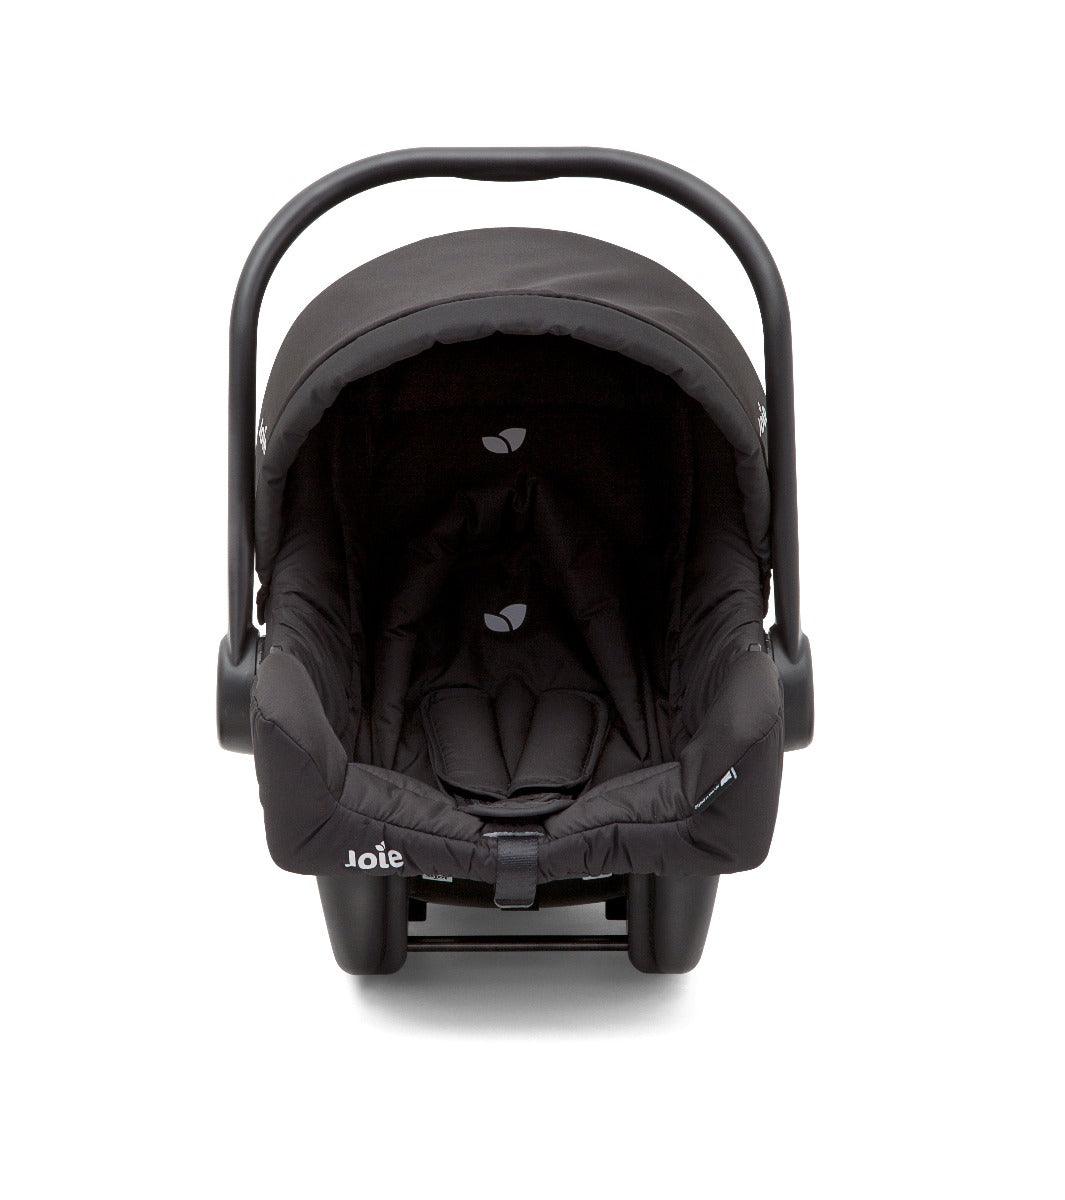 Joie Juva Infant Carrier Black Ink - Suitable Rearward Facing Birth for Ages 0-1 Years